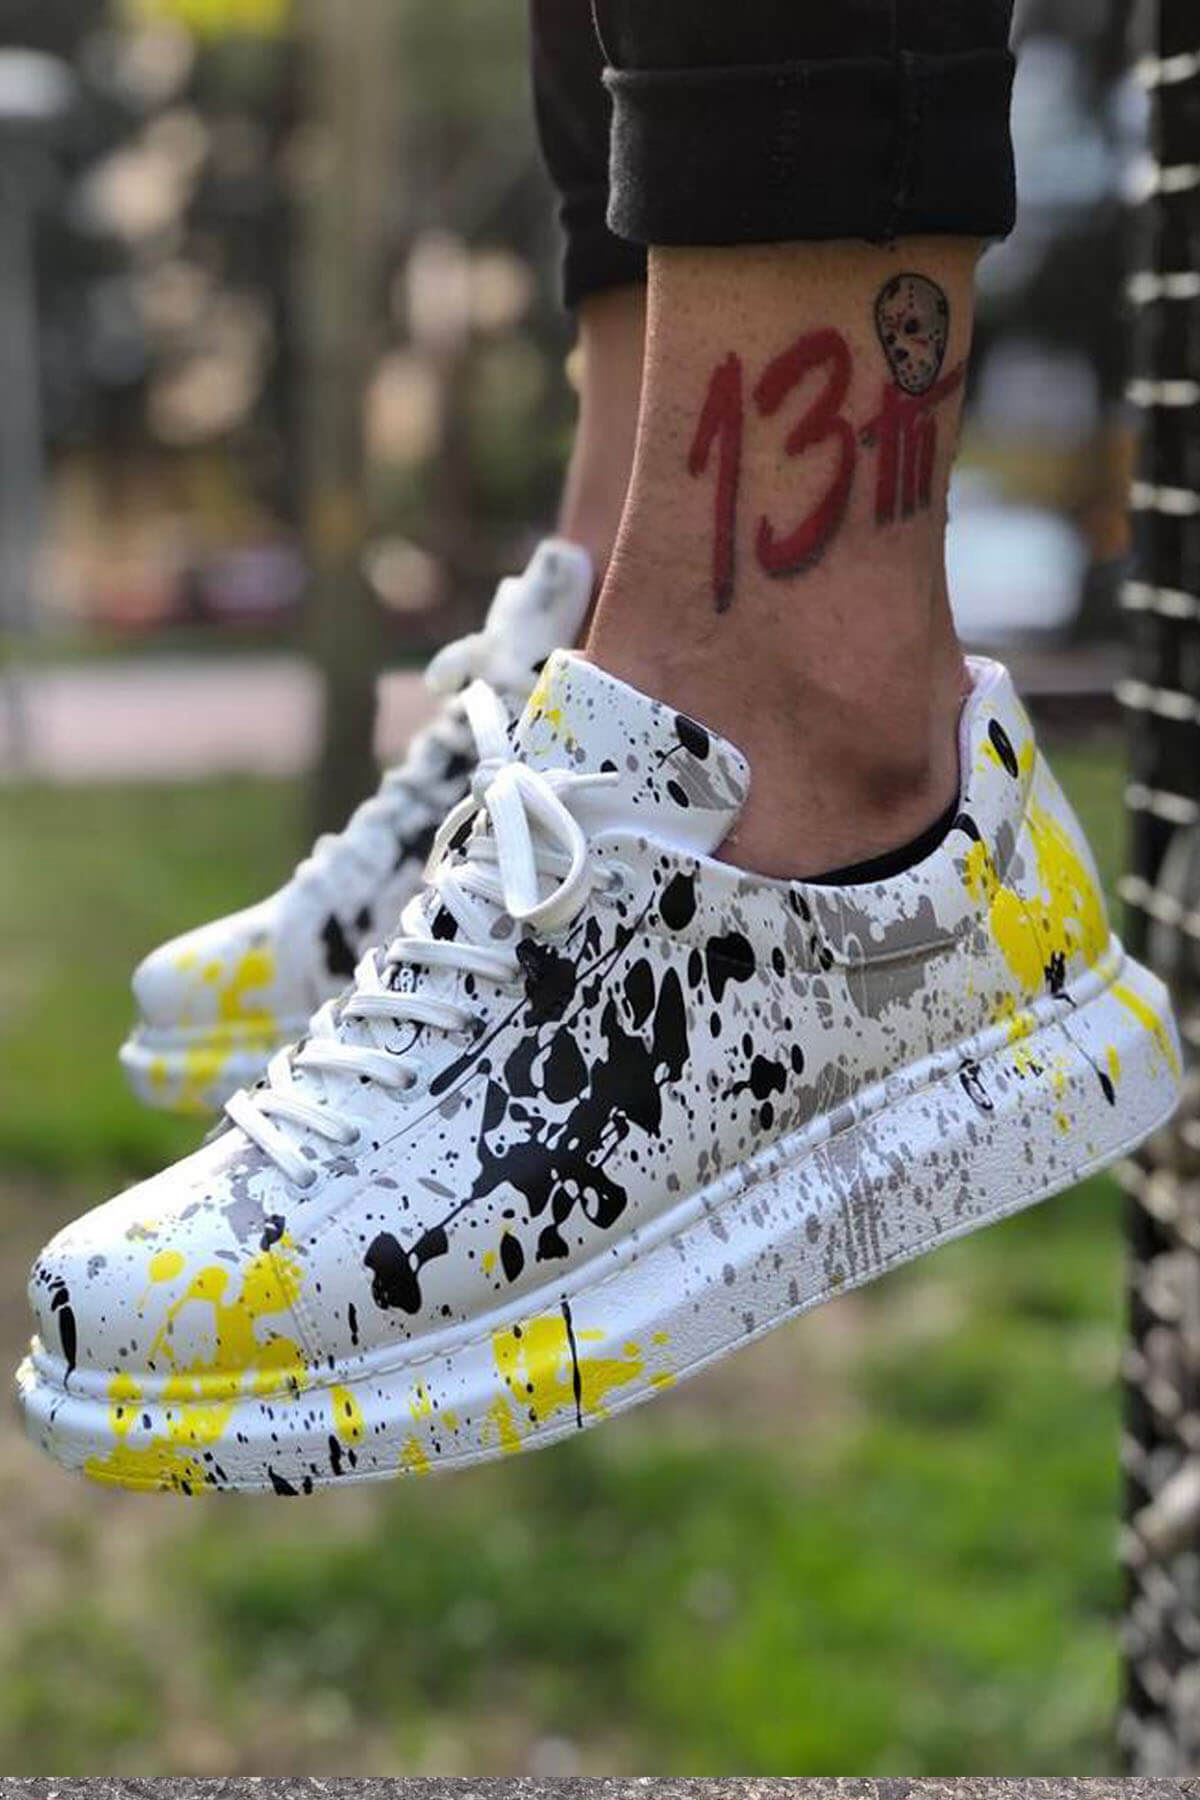 Chekich Men's & Women's Shoes White Patterned Artificial Leather Lace Up Newsletter Print Summer Autumn Seasons Unisex Sneakers Skateboard Couples Lovers Light Casual Character Text Sewing Sole Numbers School CH255 V8